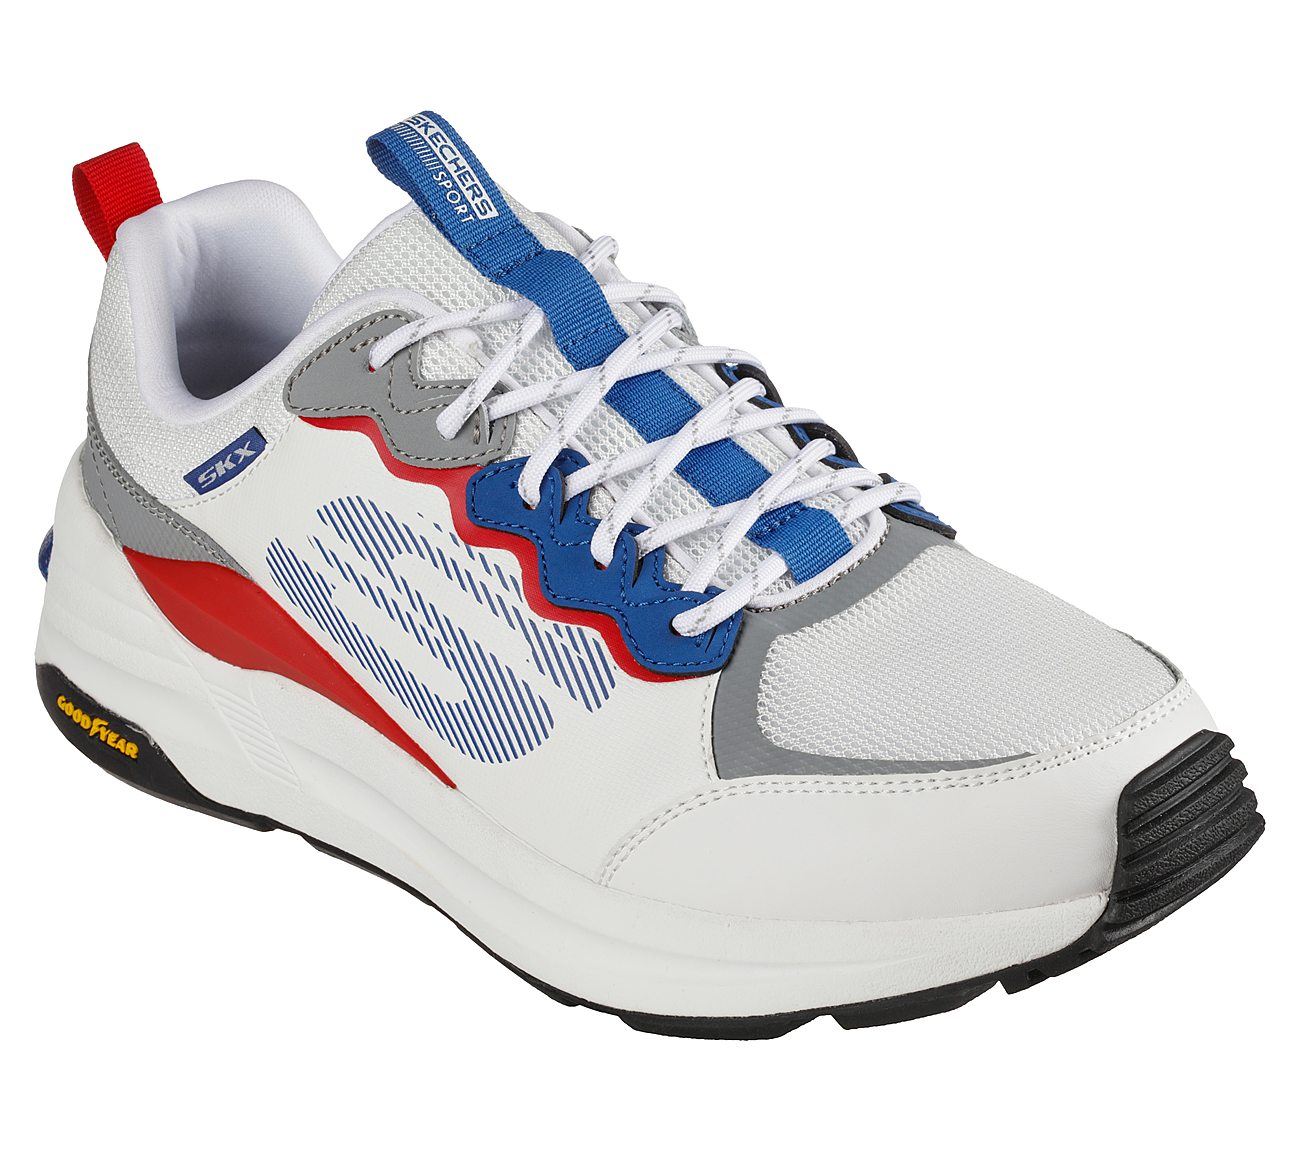 GLOBAL JOGGER, WHITE/RED/BLACK Footwear Lateral View